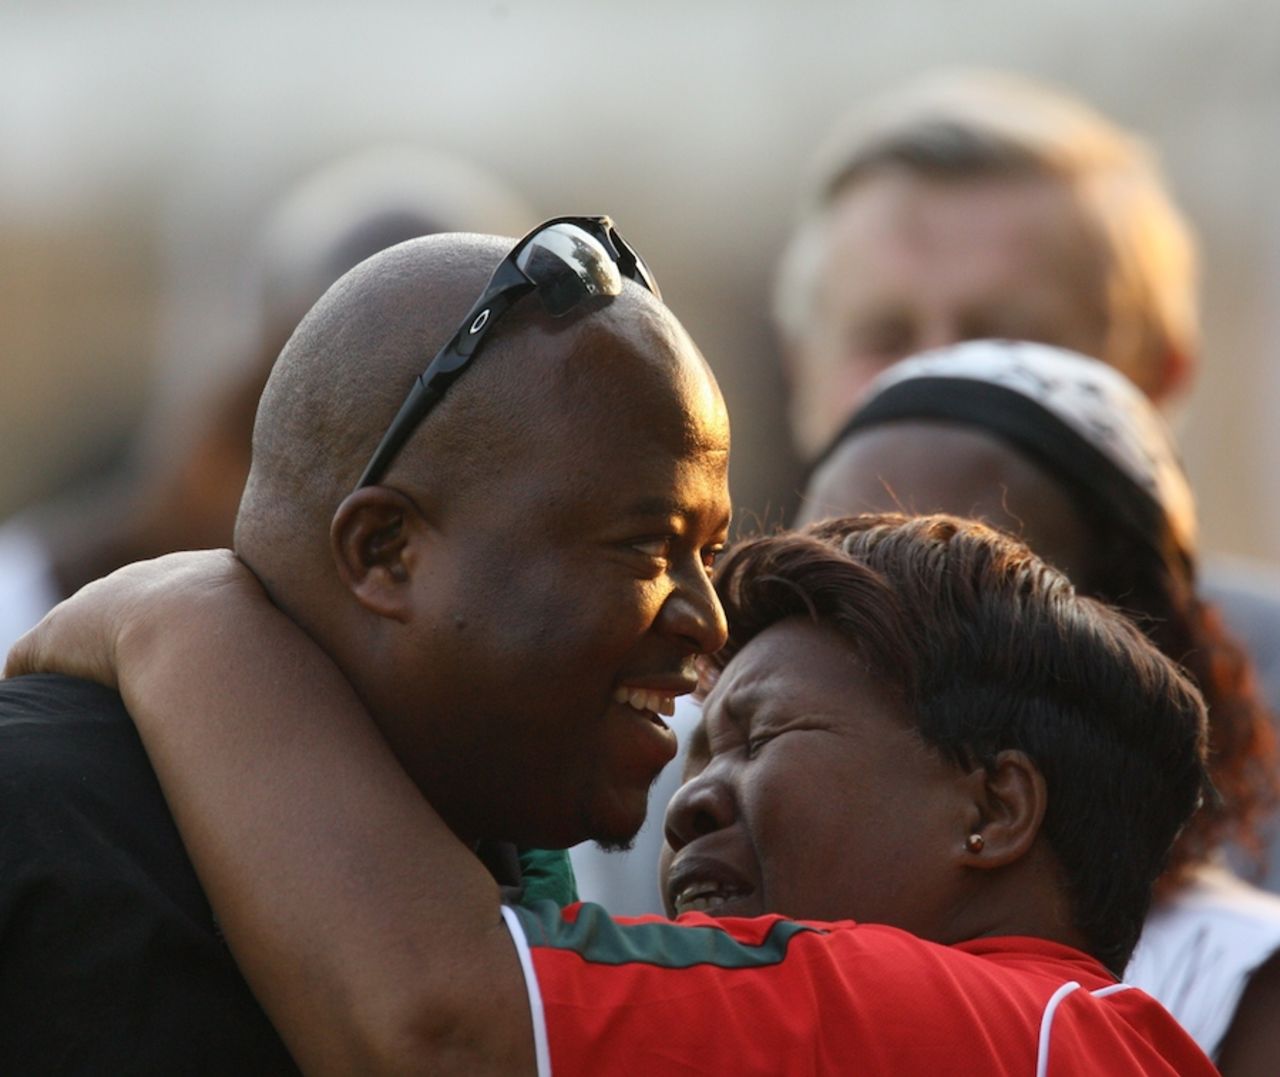 Zimbabwe coach Stephen Mangongo is congratulated by his mother, Zimbabwe v Australia, tri-series, Harare, August 31, 2014